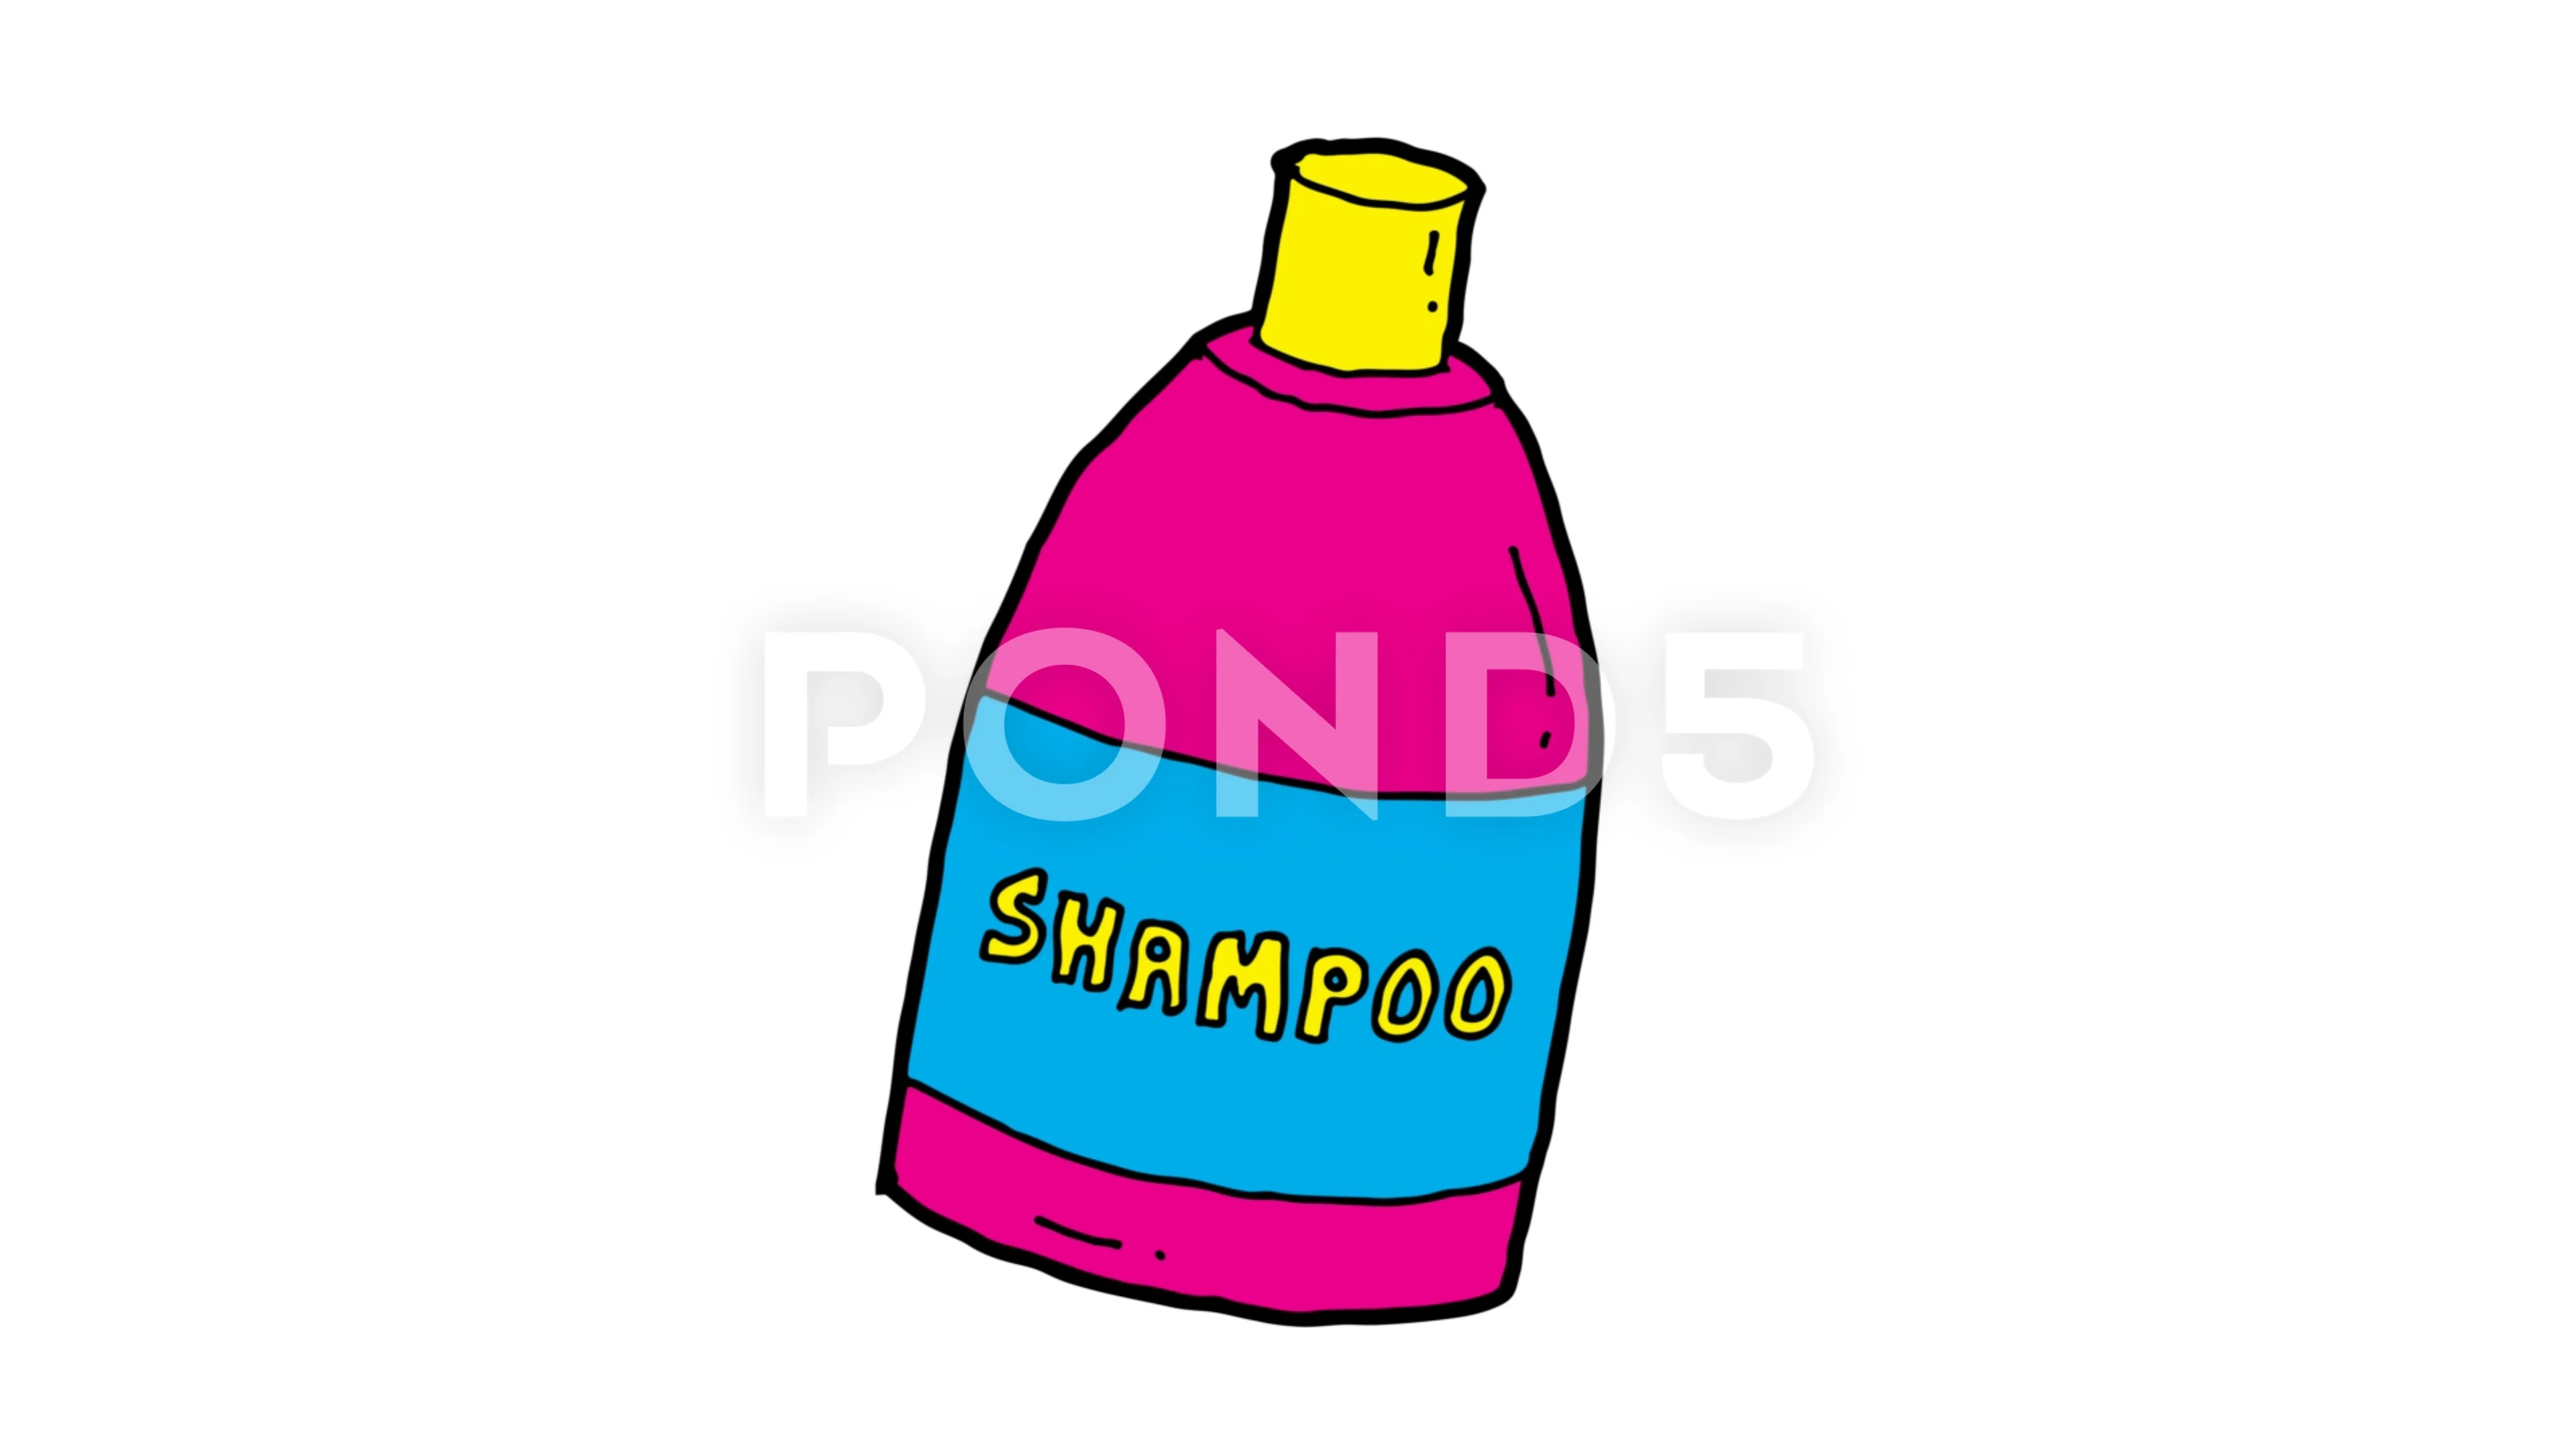 Shampoo Bottles For Cat And Dog Monochrome Vector - stock vector 3737235 |  Crushpixel